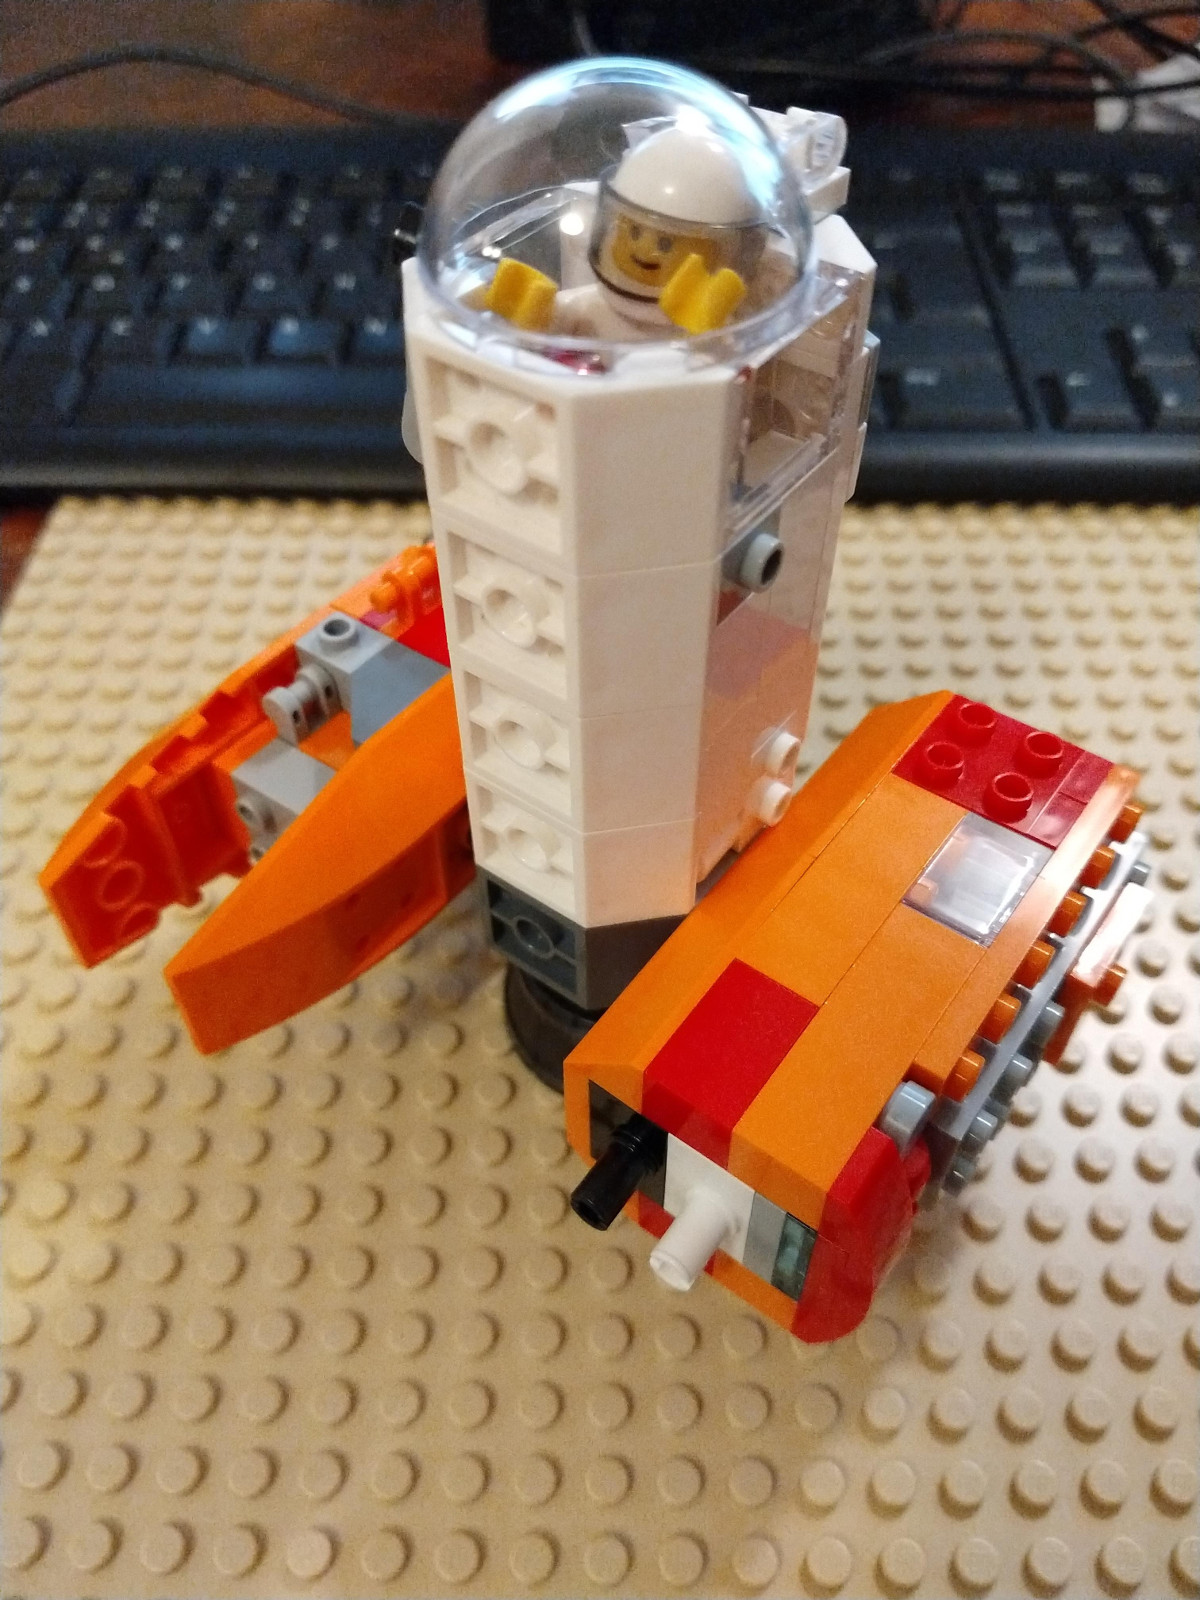 Modules attached to the command module to create a space station